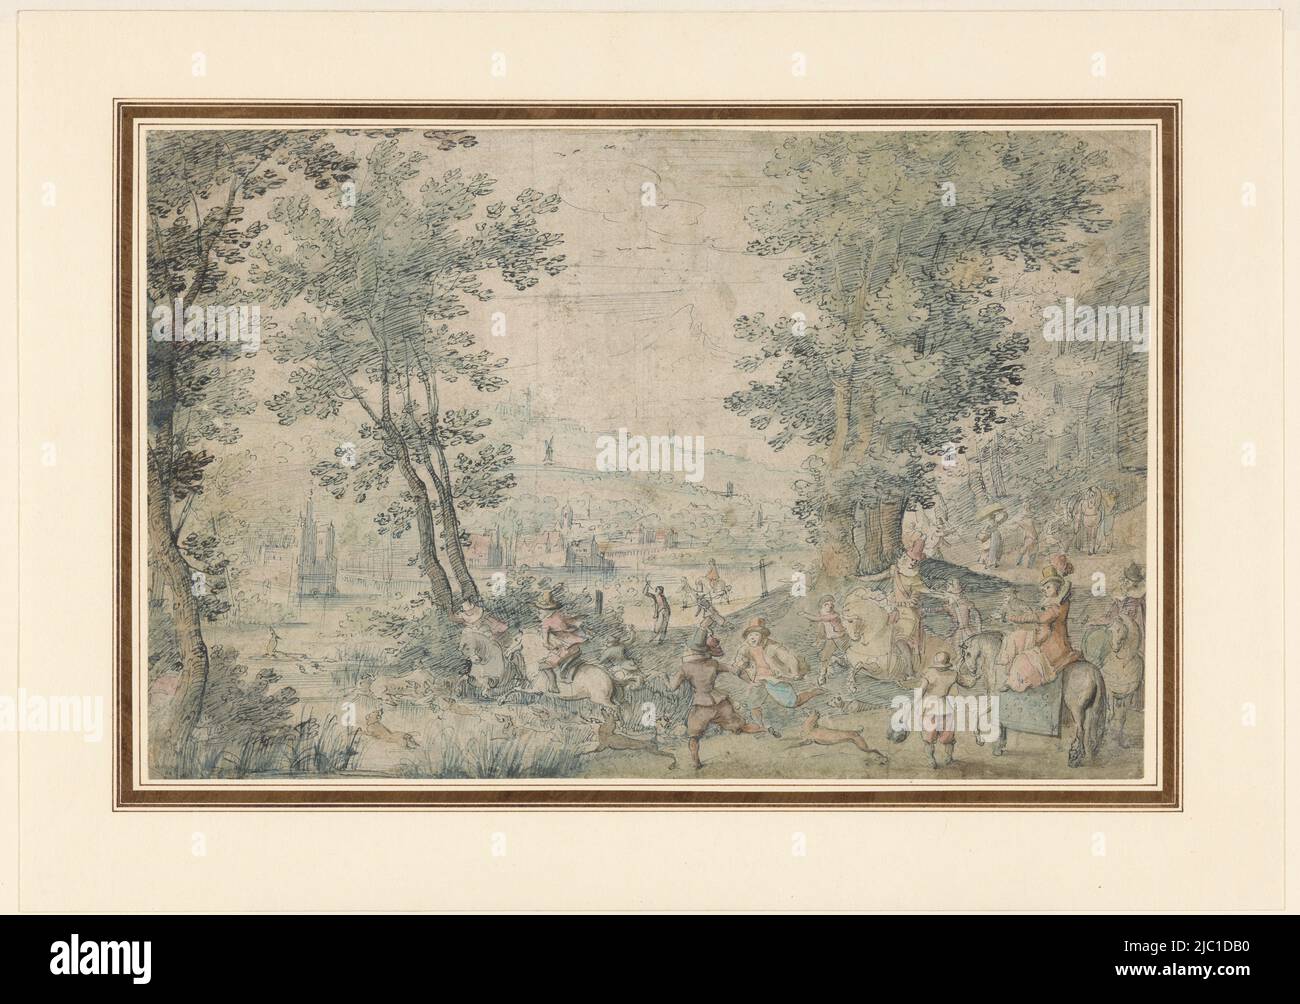 Landscape near Brussels with deer hunt, draughtsman: Denis van Alsloot, (possibly), draughtsman: anonymous, 1620 - 1640, paper, pen, brush, h 203 mm × w 312 mm Stock Photo